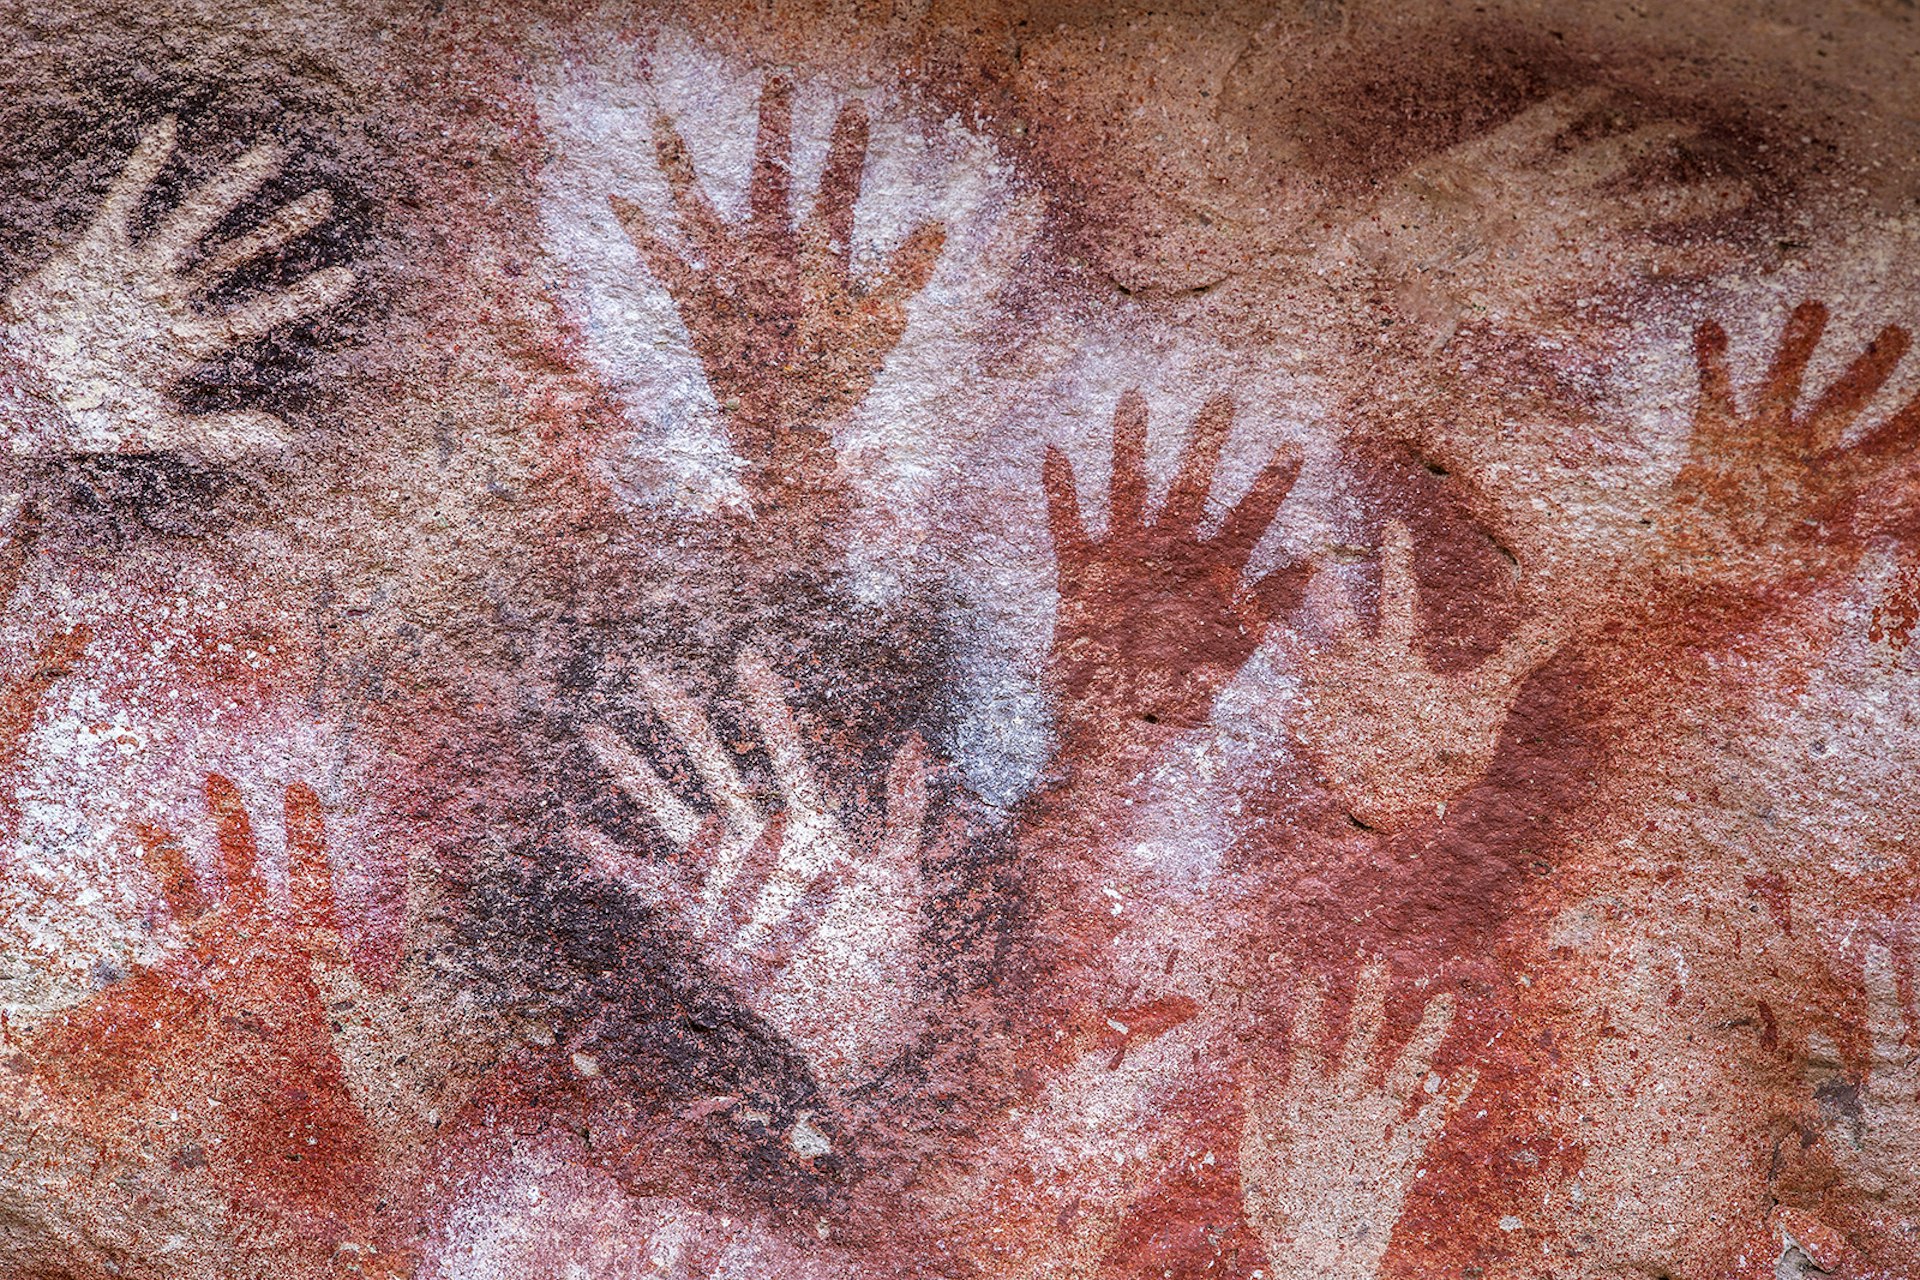 Hands made from painted shadows in white, red and maroon spread across an orange cave wall. Patagonia, Argentina.